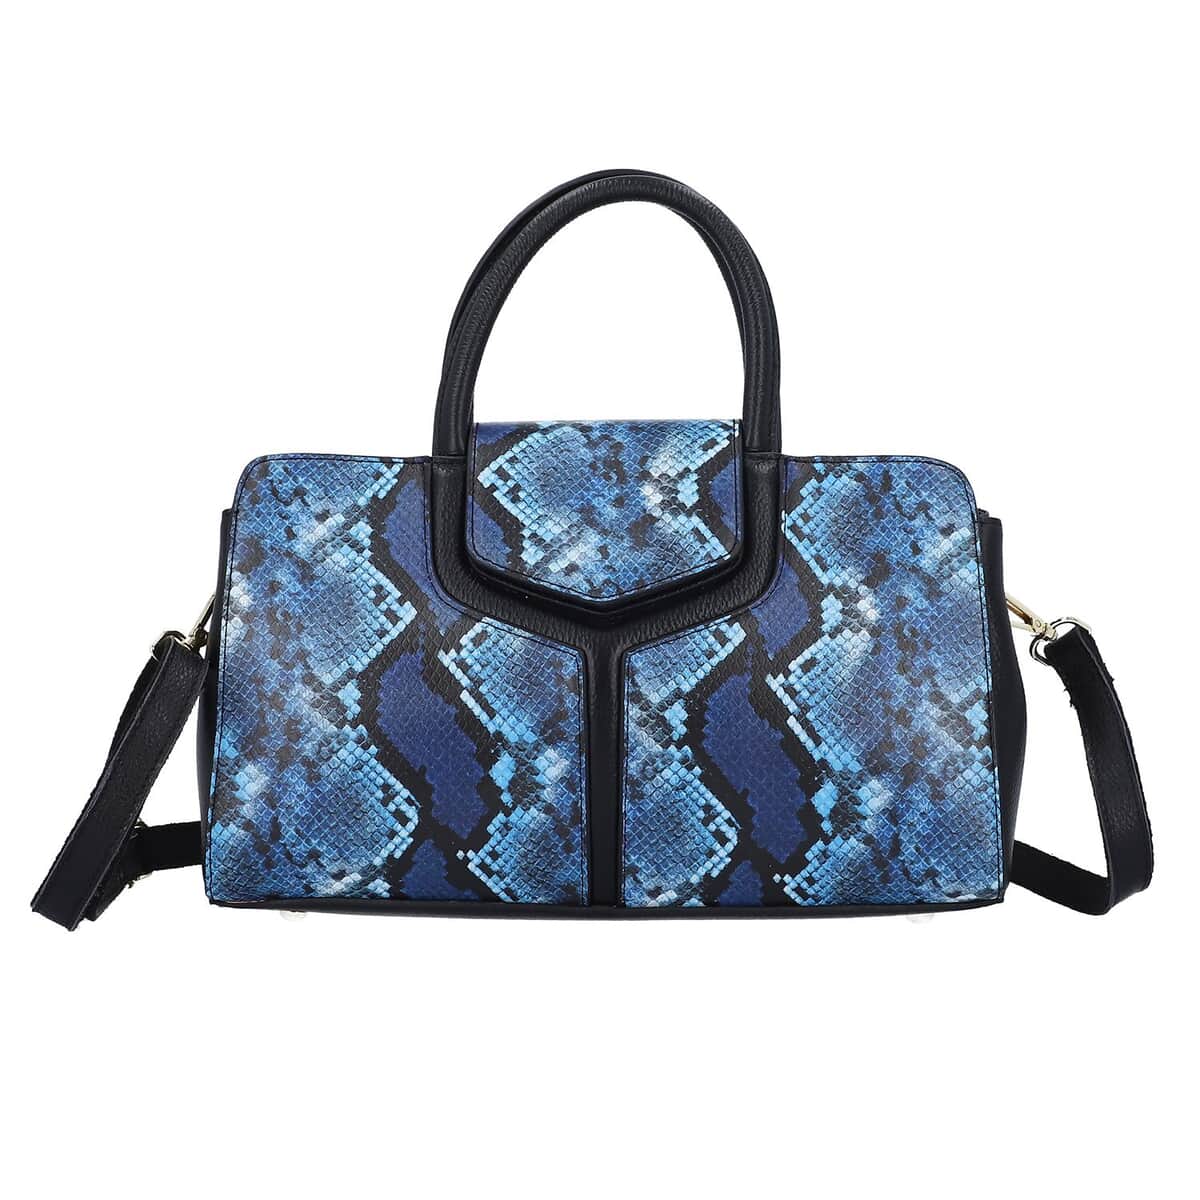 Black and Blue Snake Print Genuine Leather Convertible Tote Bag with Shoulder Strap image number 0